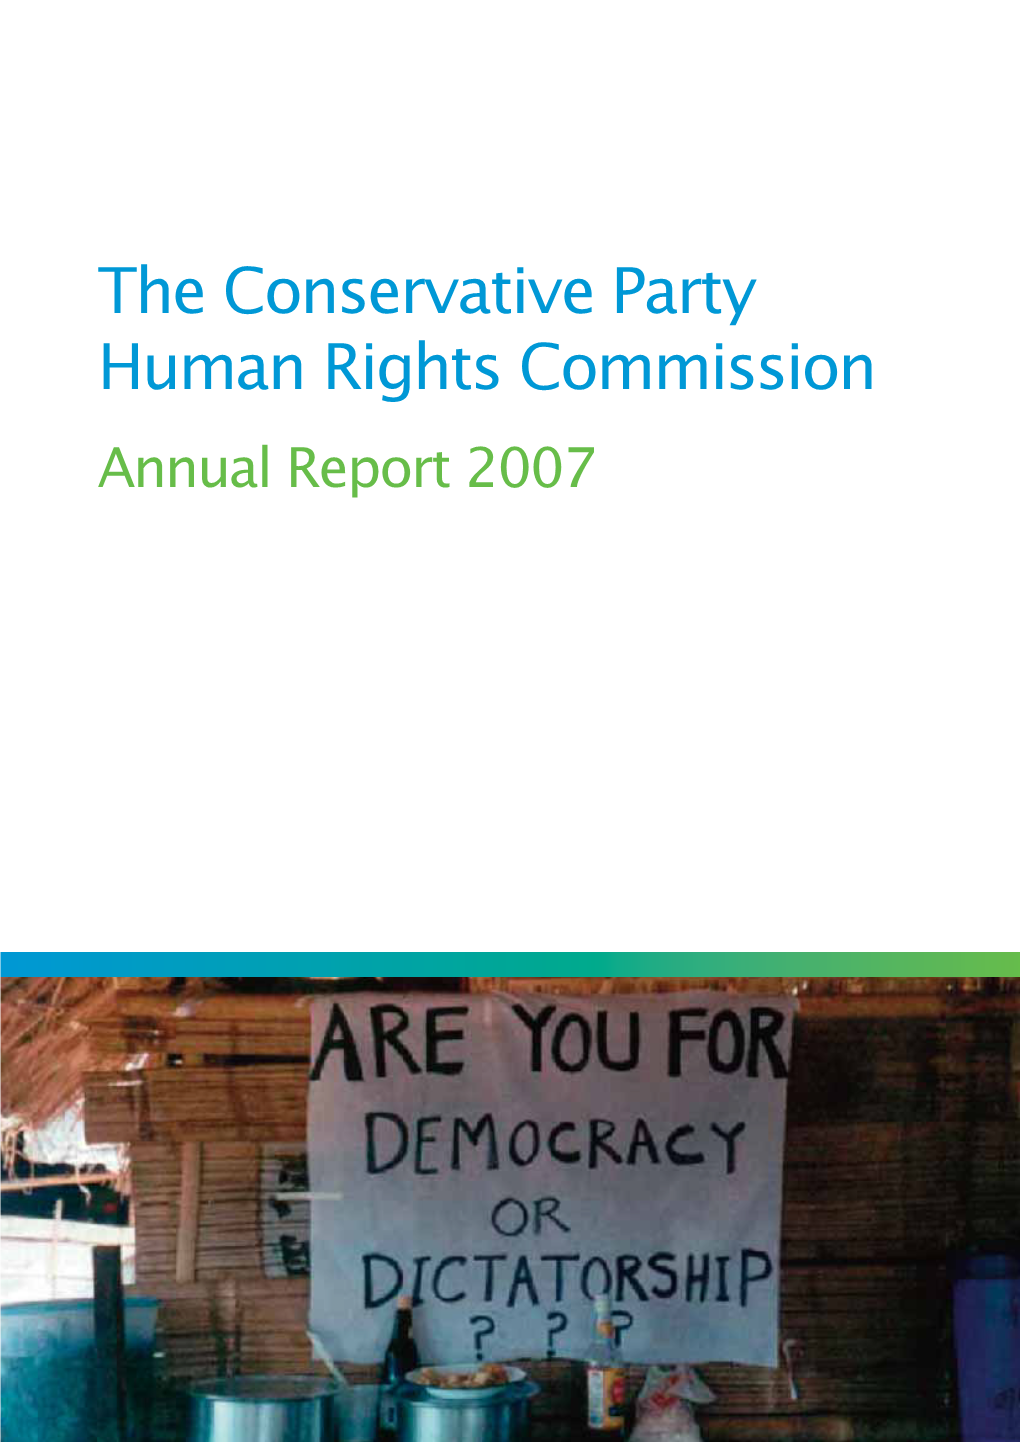 The Conservative Party Human Rights Commission Annual Report 2007